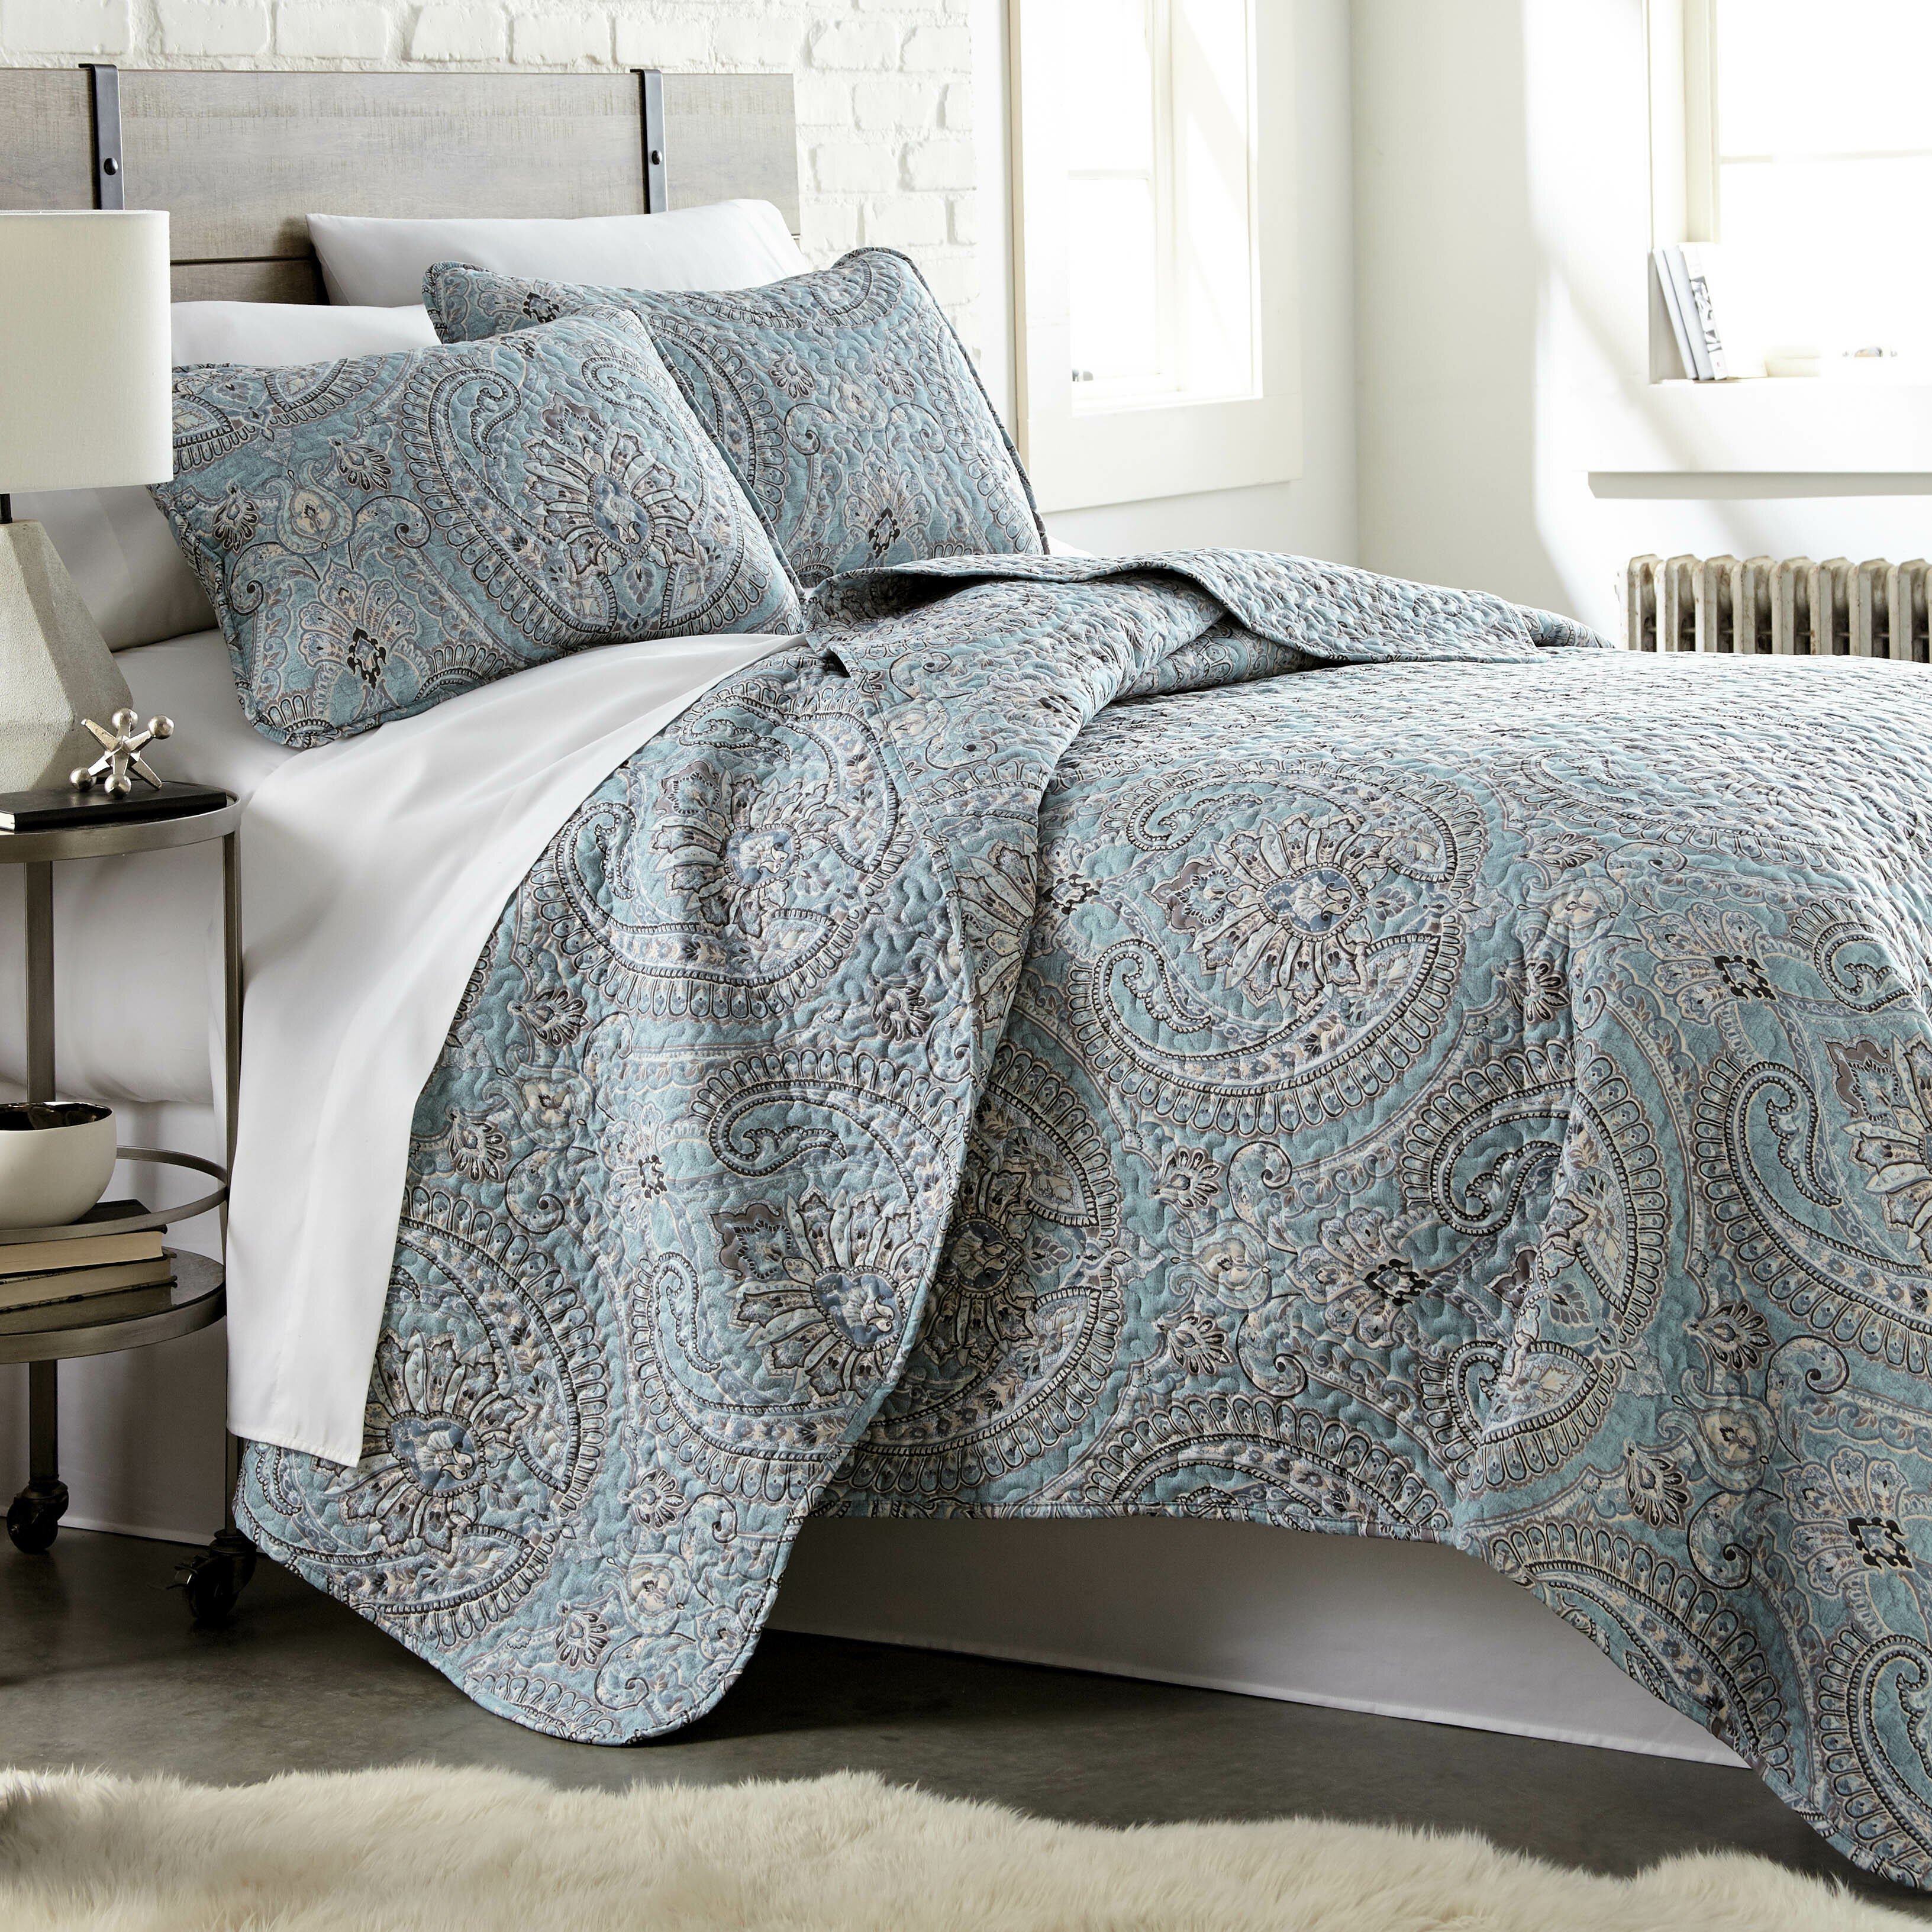 Breathable Coverl Details about   Madison Park Quilt Classic Damask Medallion Design All Season 